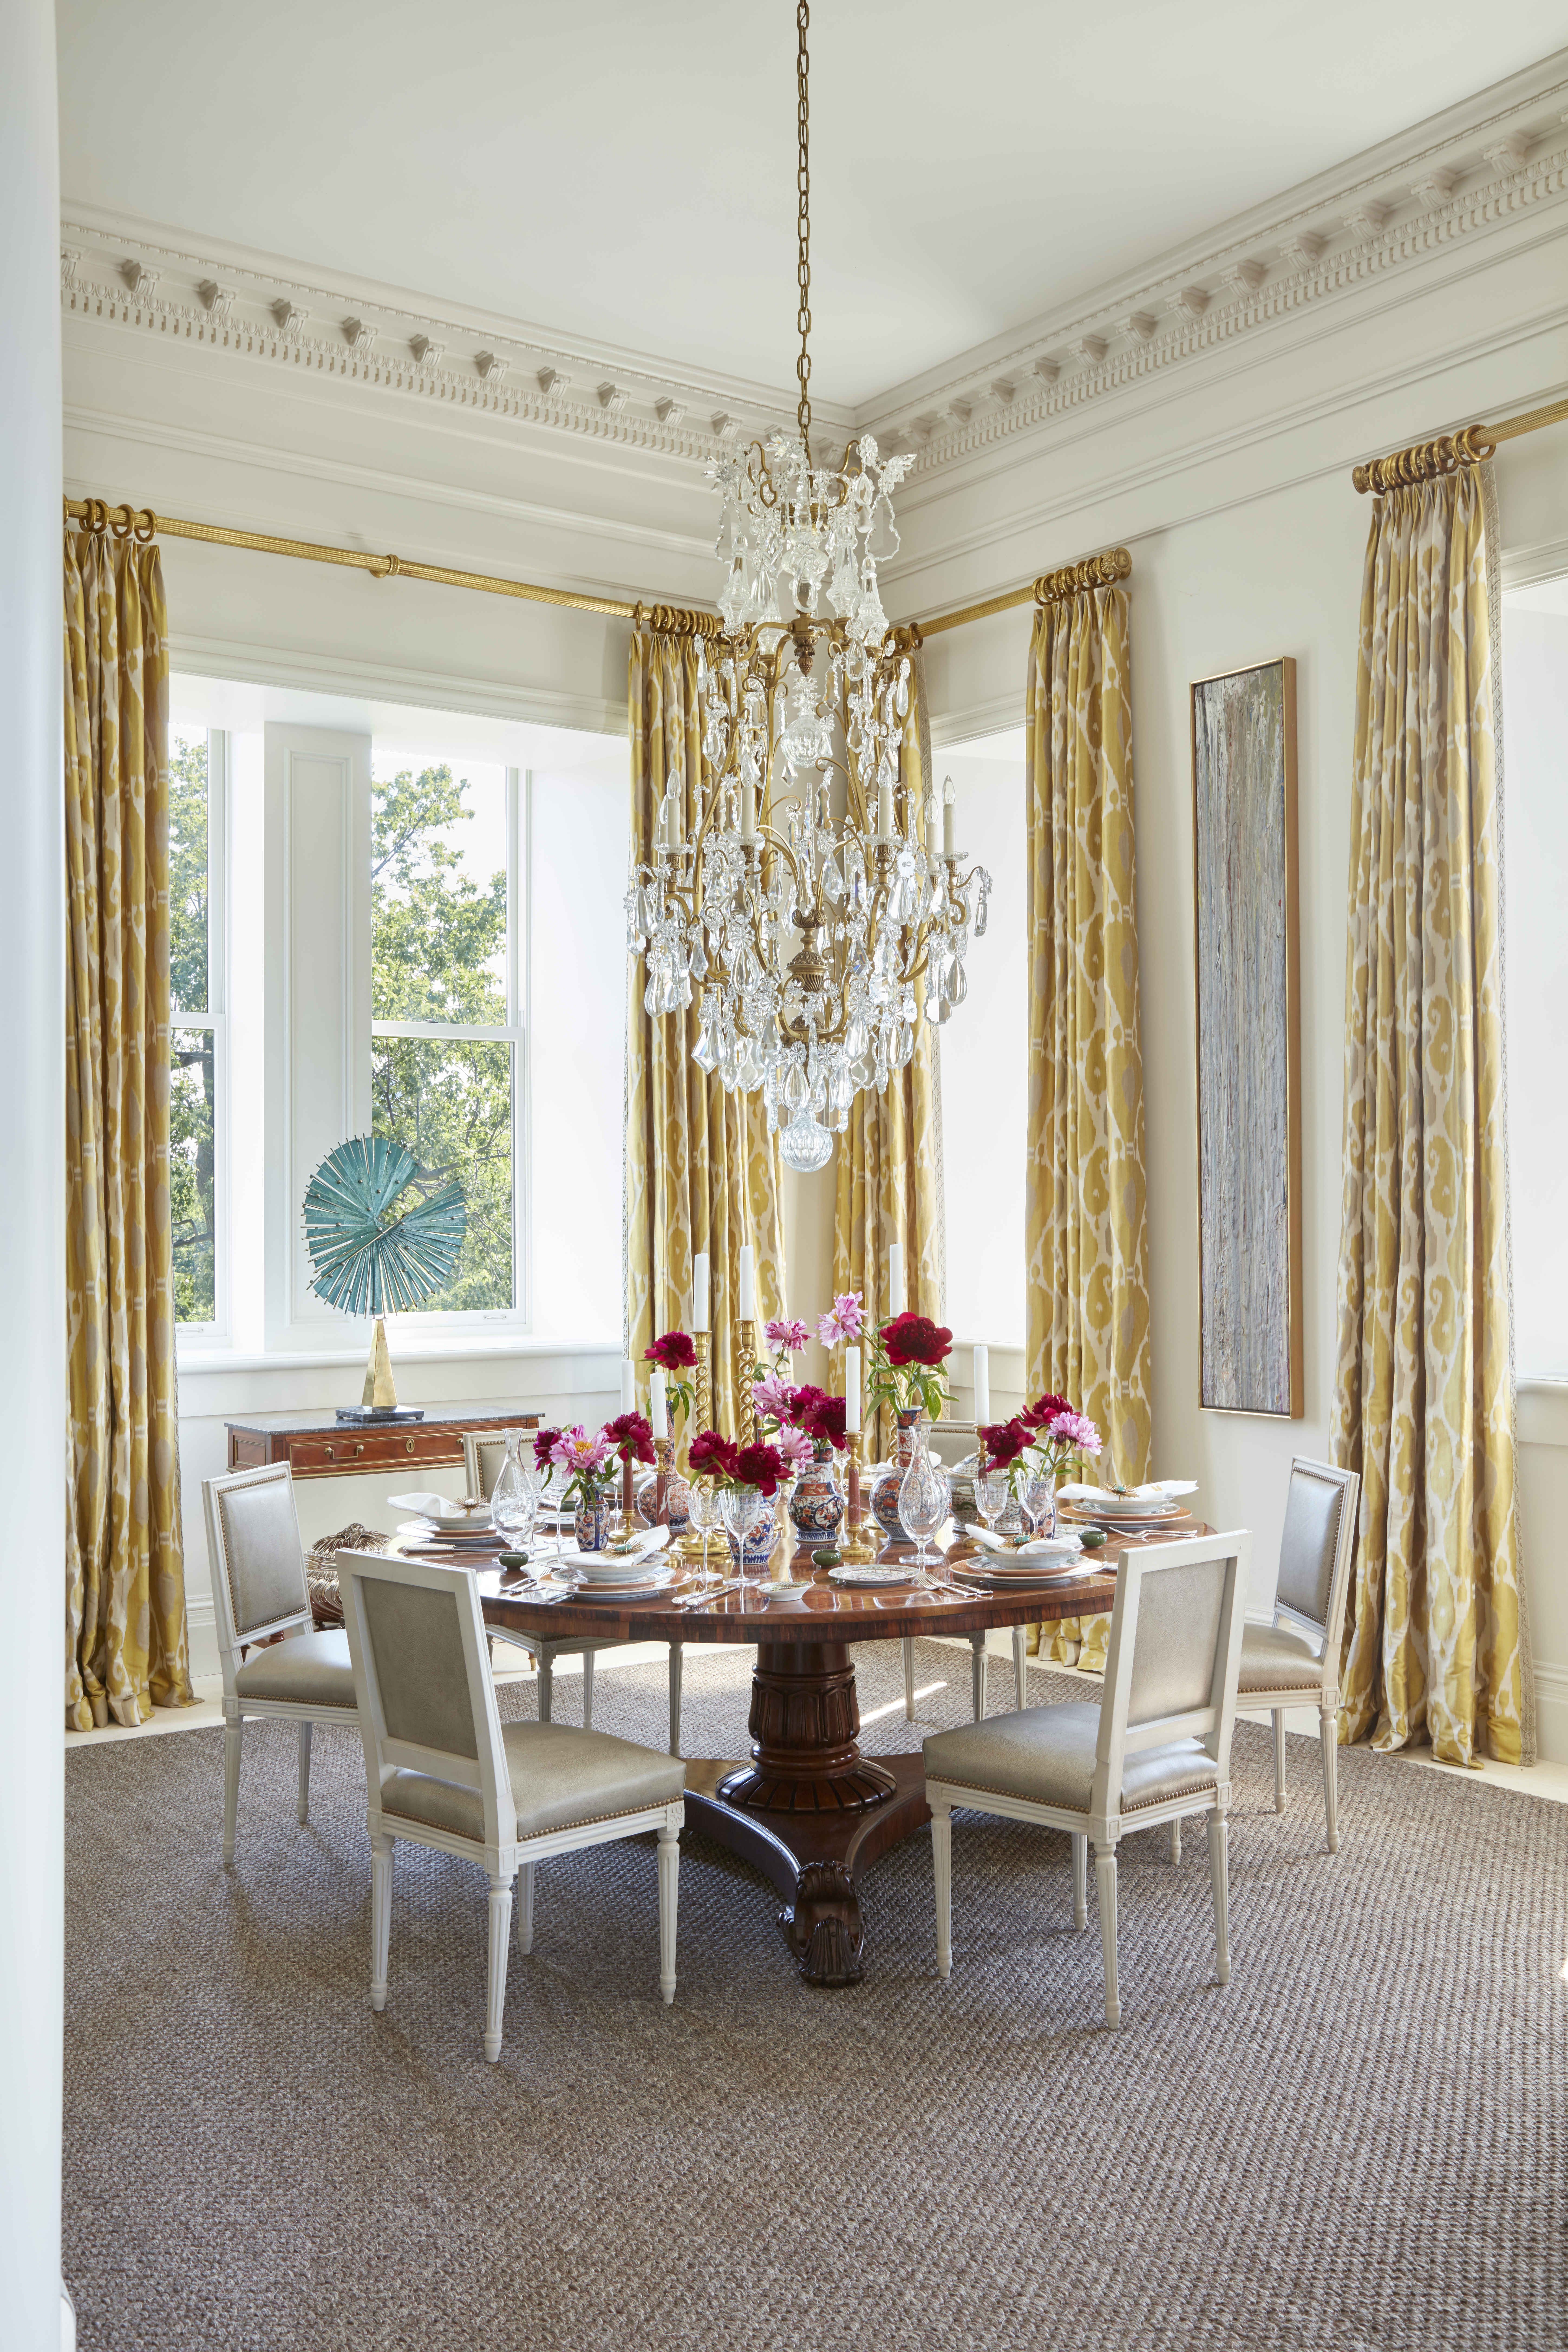 classic formal dining room decorating ideas with curtains design